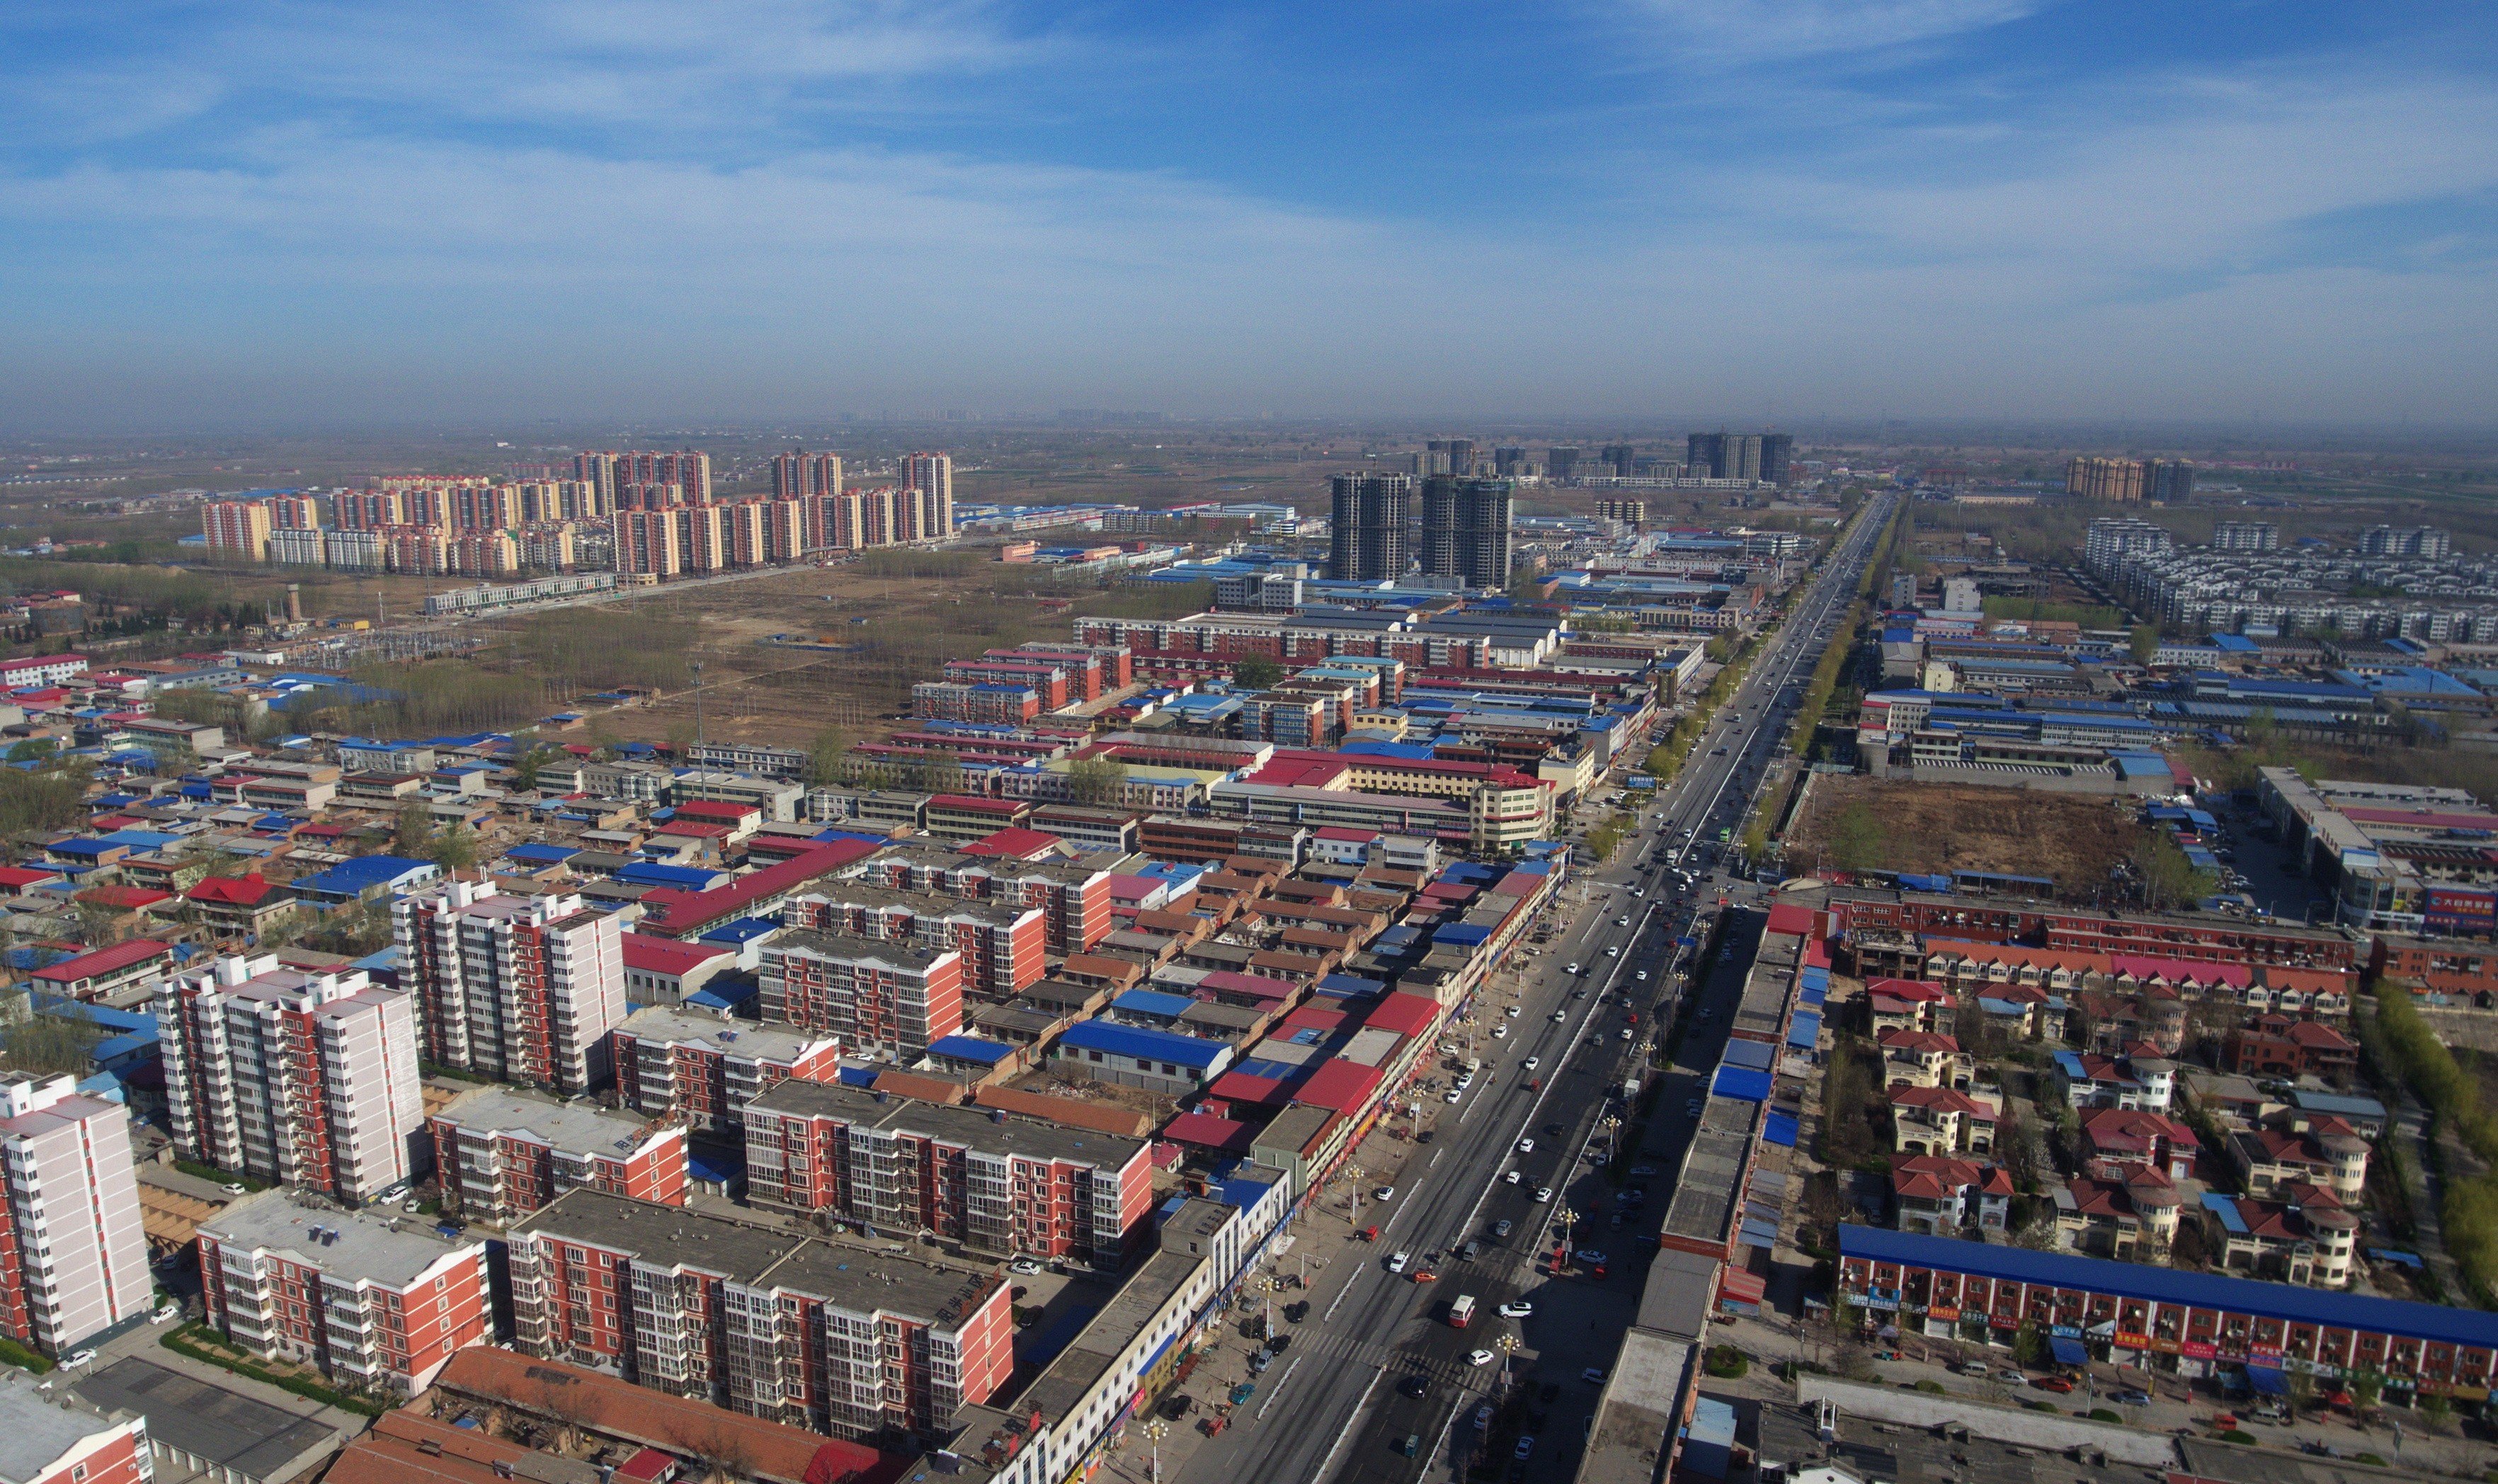 Xiongan has been chosen as the site of a new megacity. Photo: Xinhua